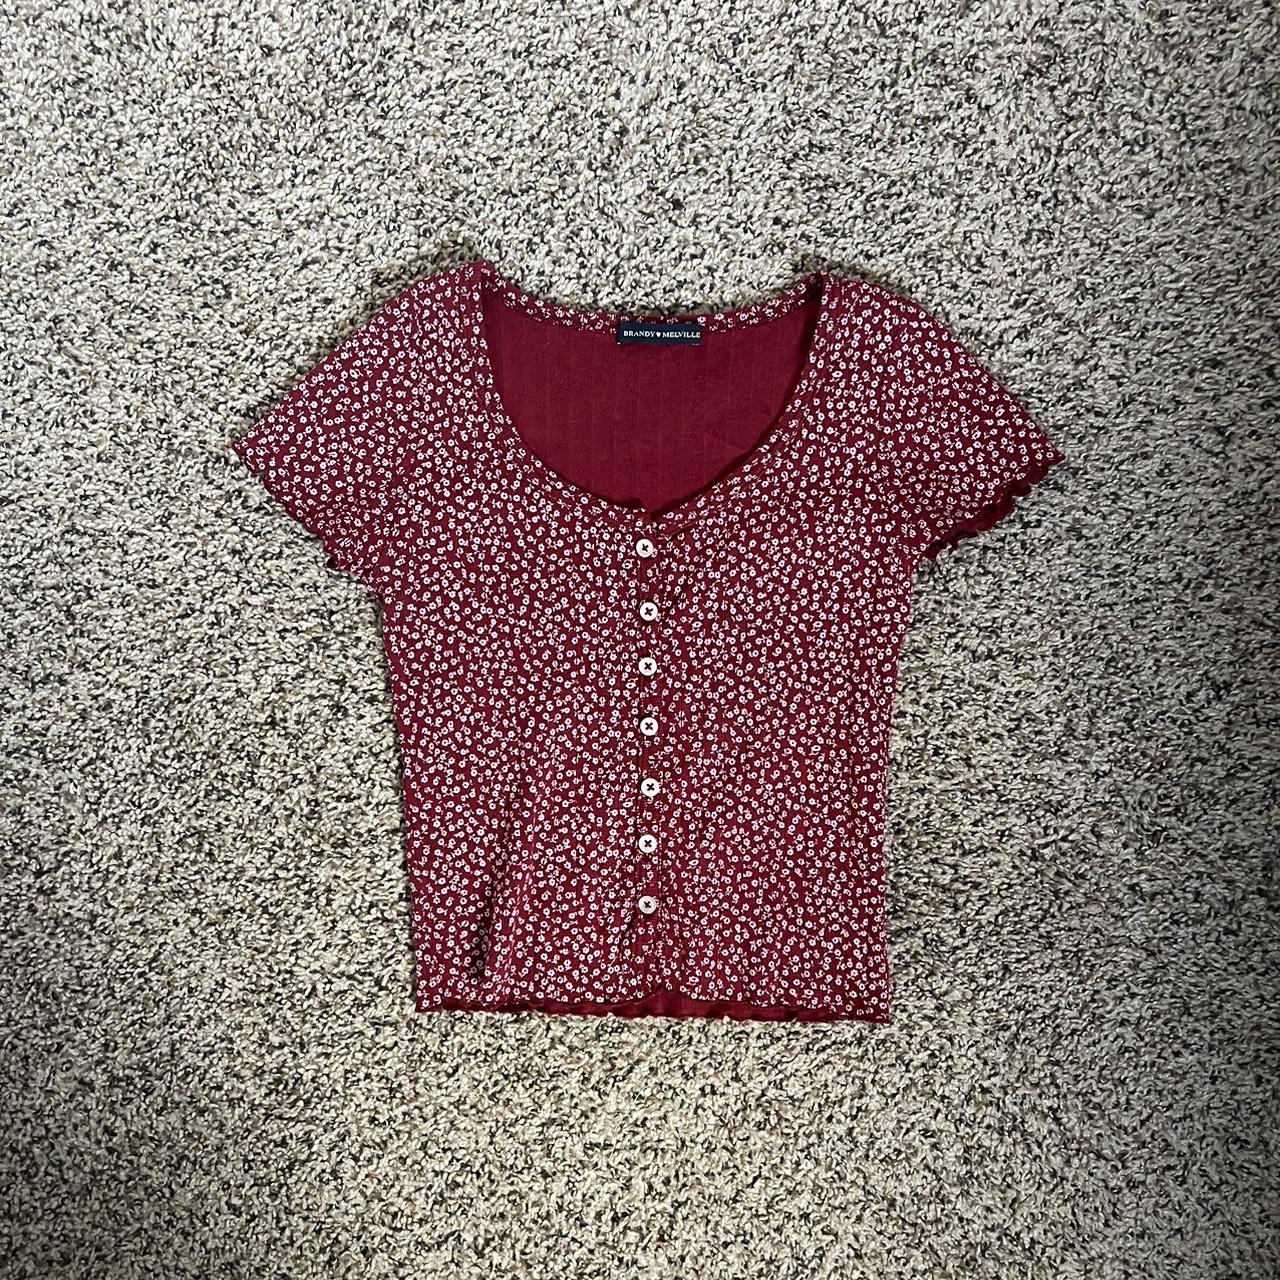 Brandy Melville Red Floral Top 🌹